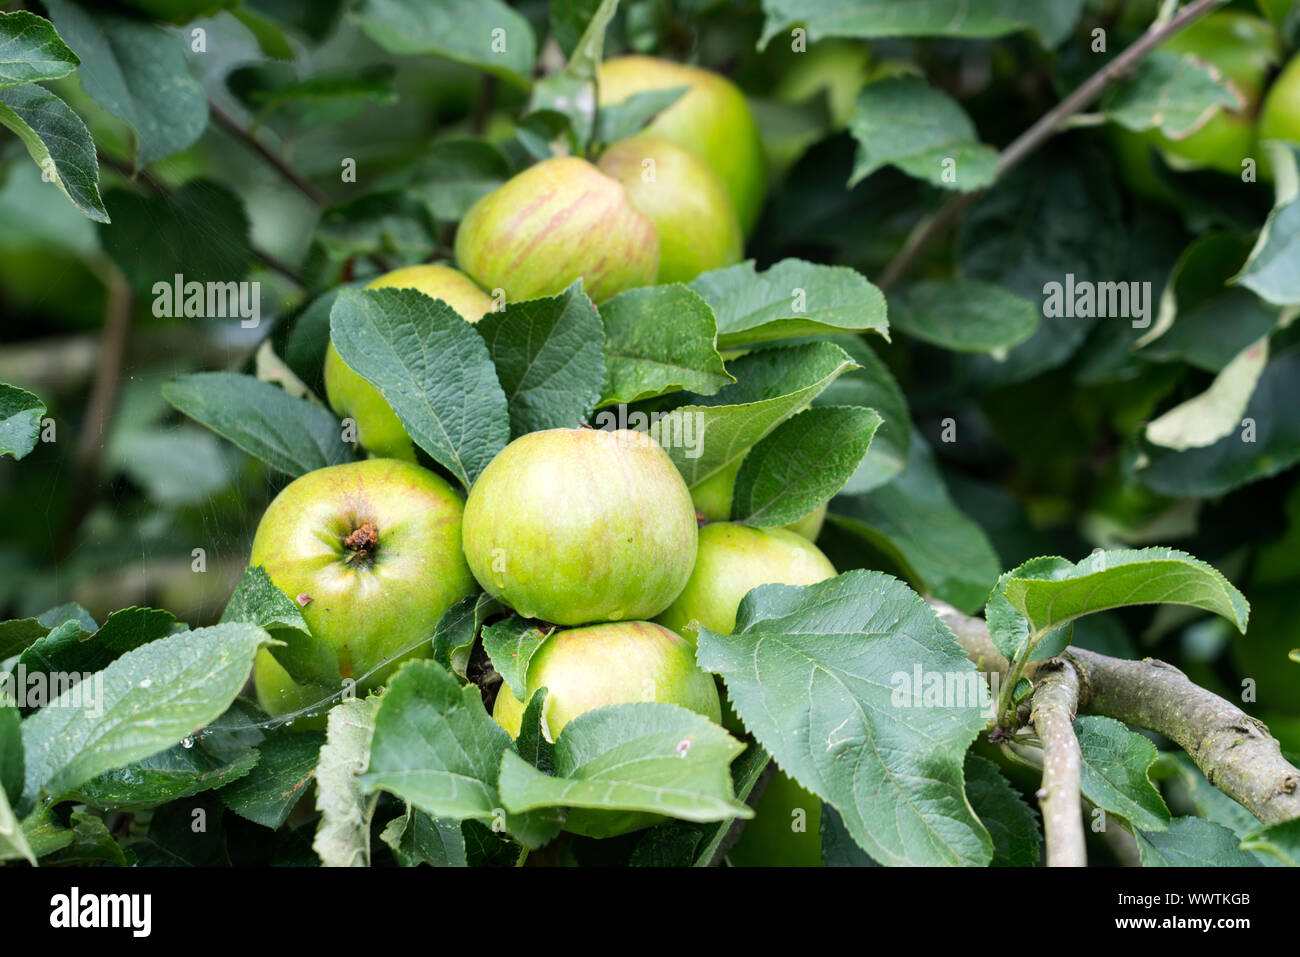 Malus Hilde, apple, old variety, Germany, Europe; Stock Photo